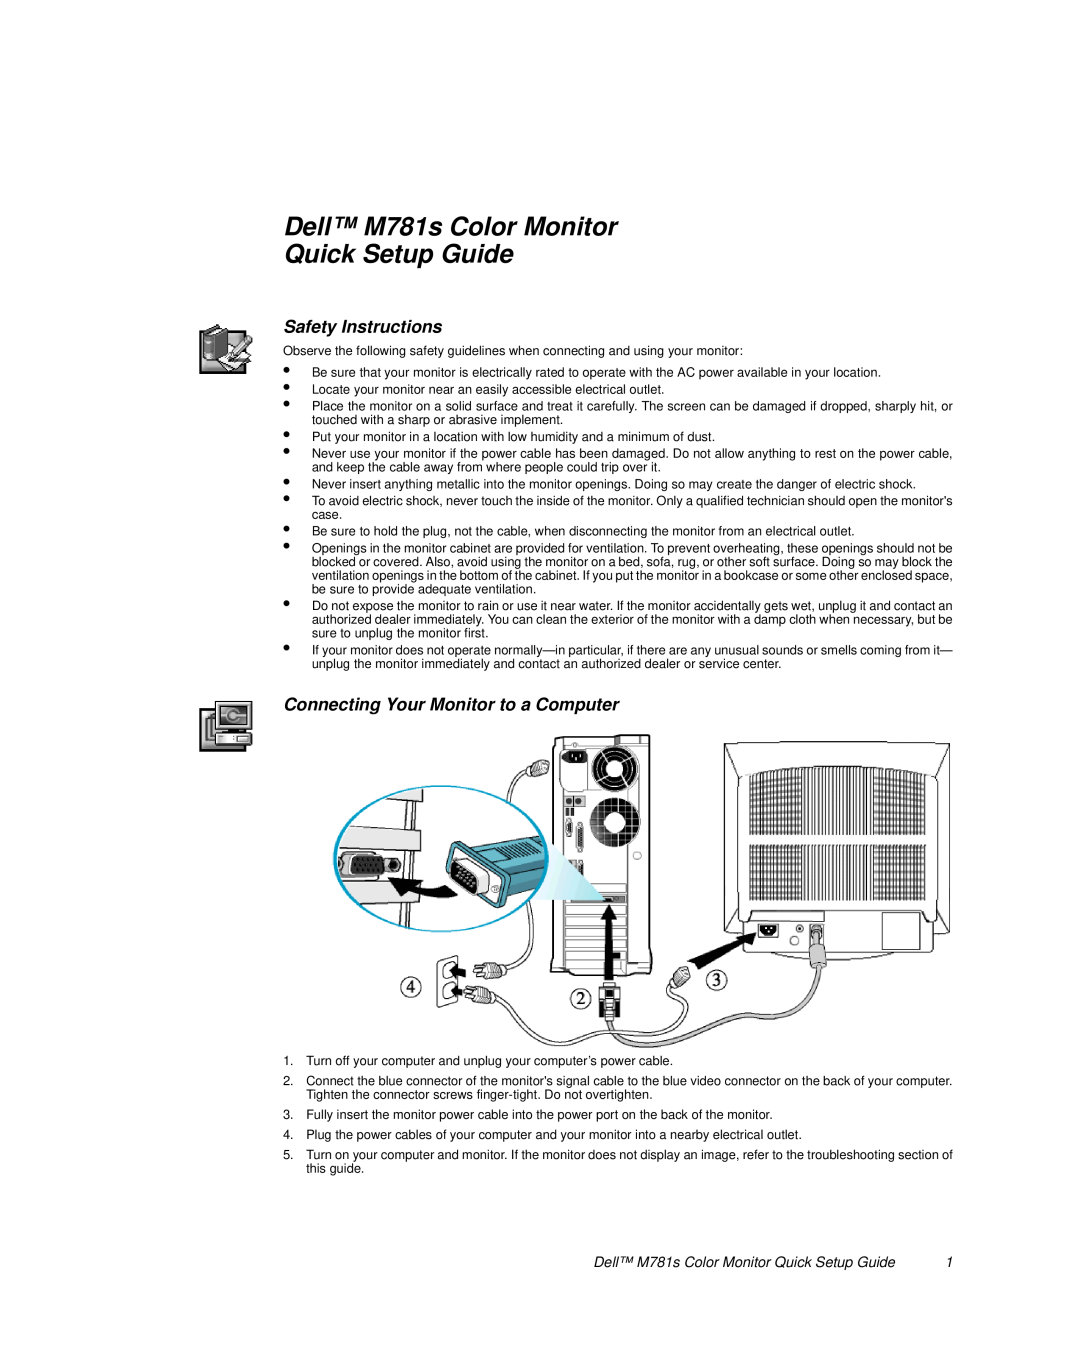 Dell M781s setup guide Safety Instructions, Connecting Your Monitor to a Computer 